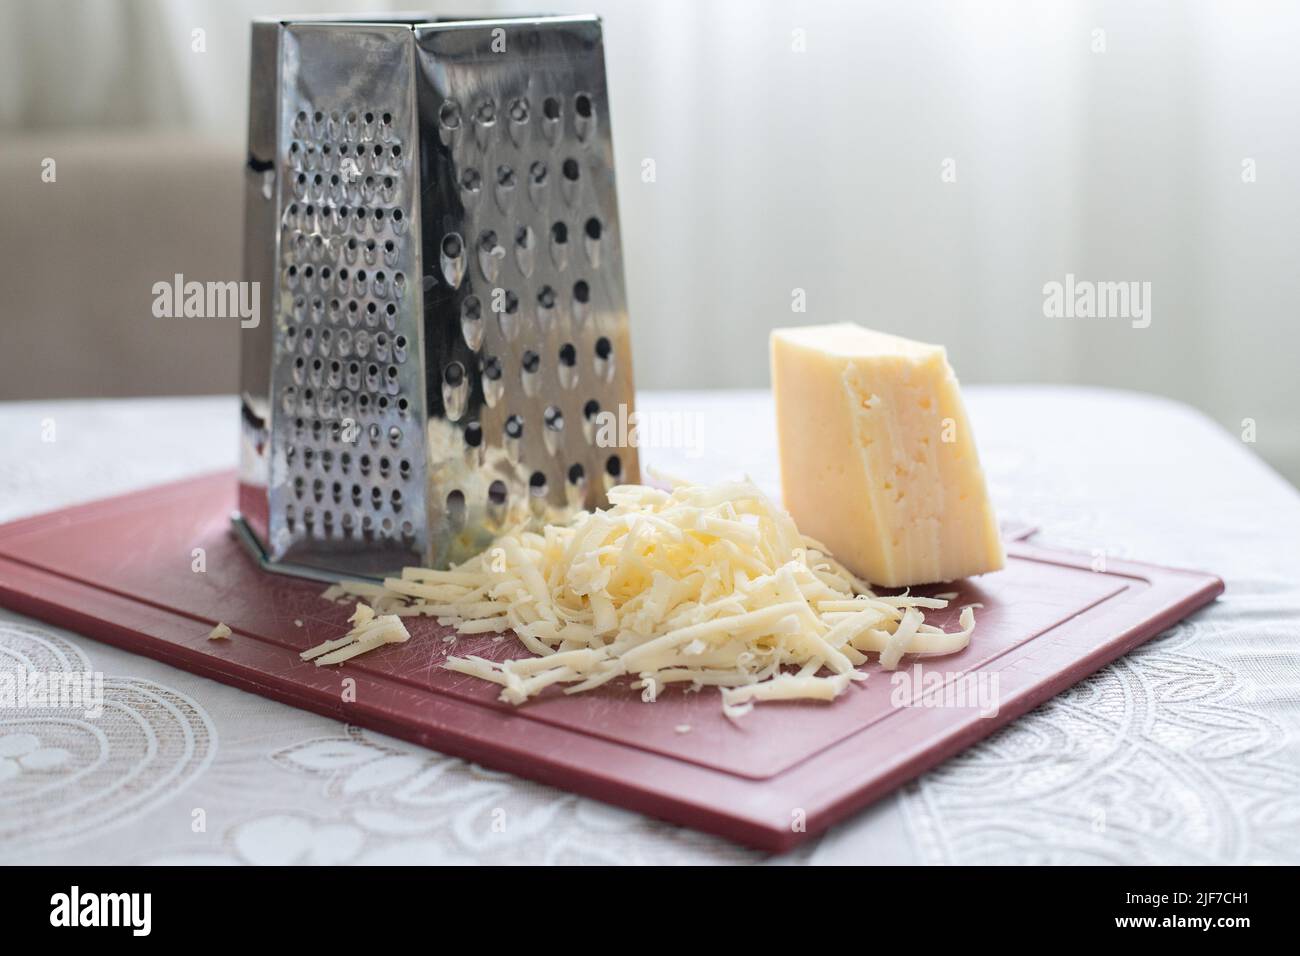 A pile of grated cheese on a plastic board next to a grater Stock Photo